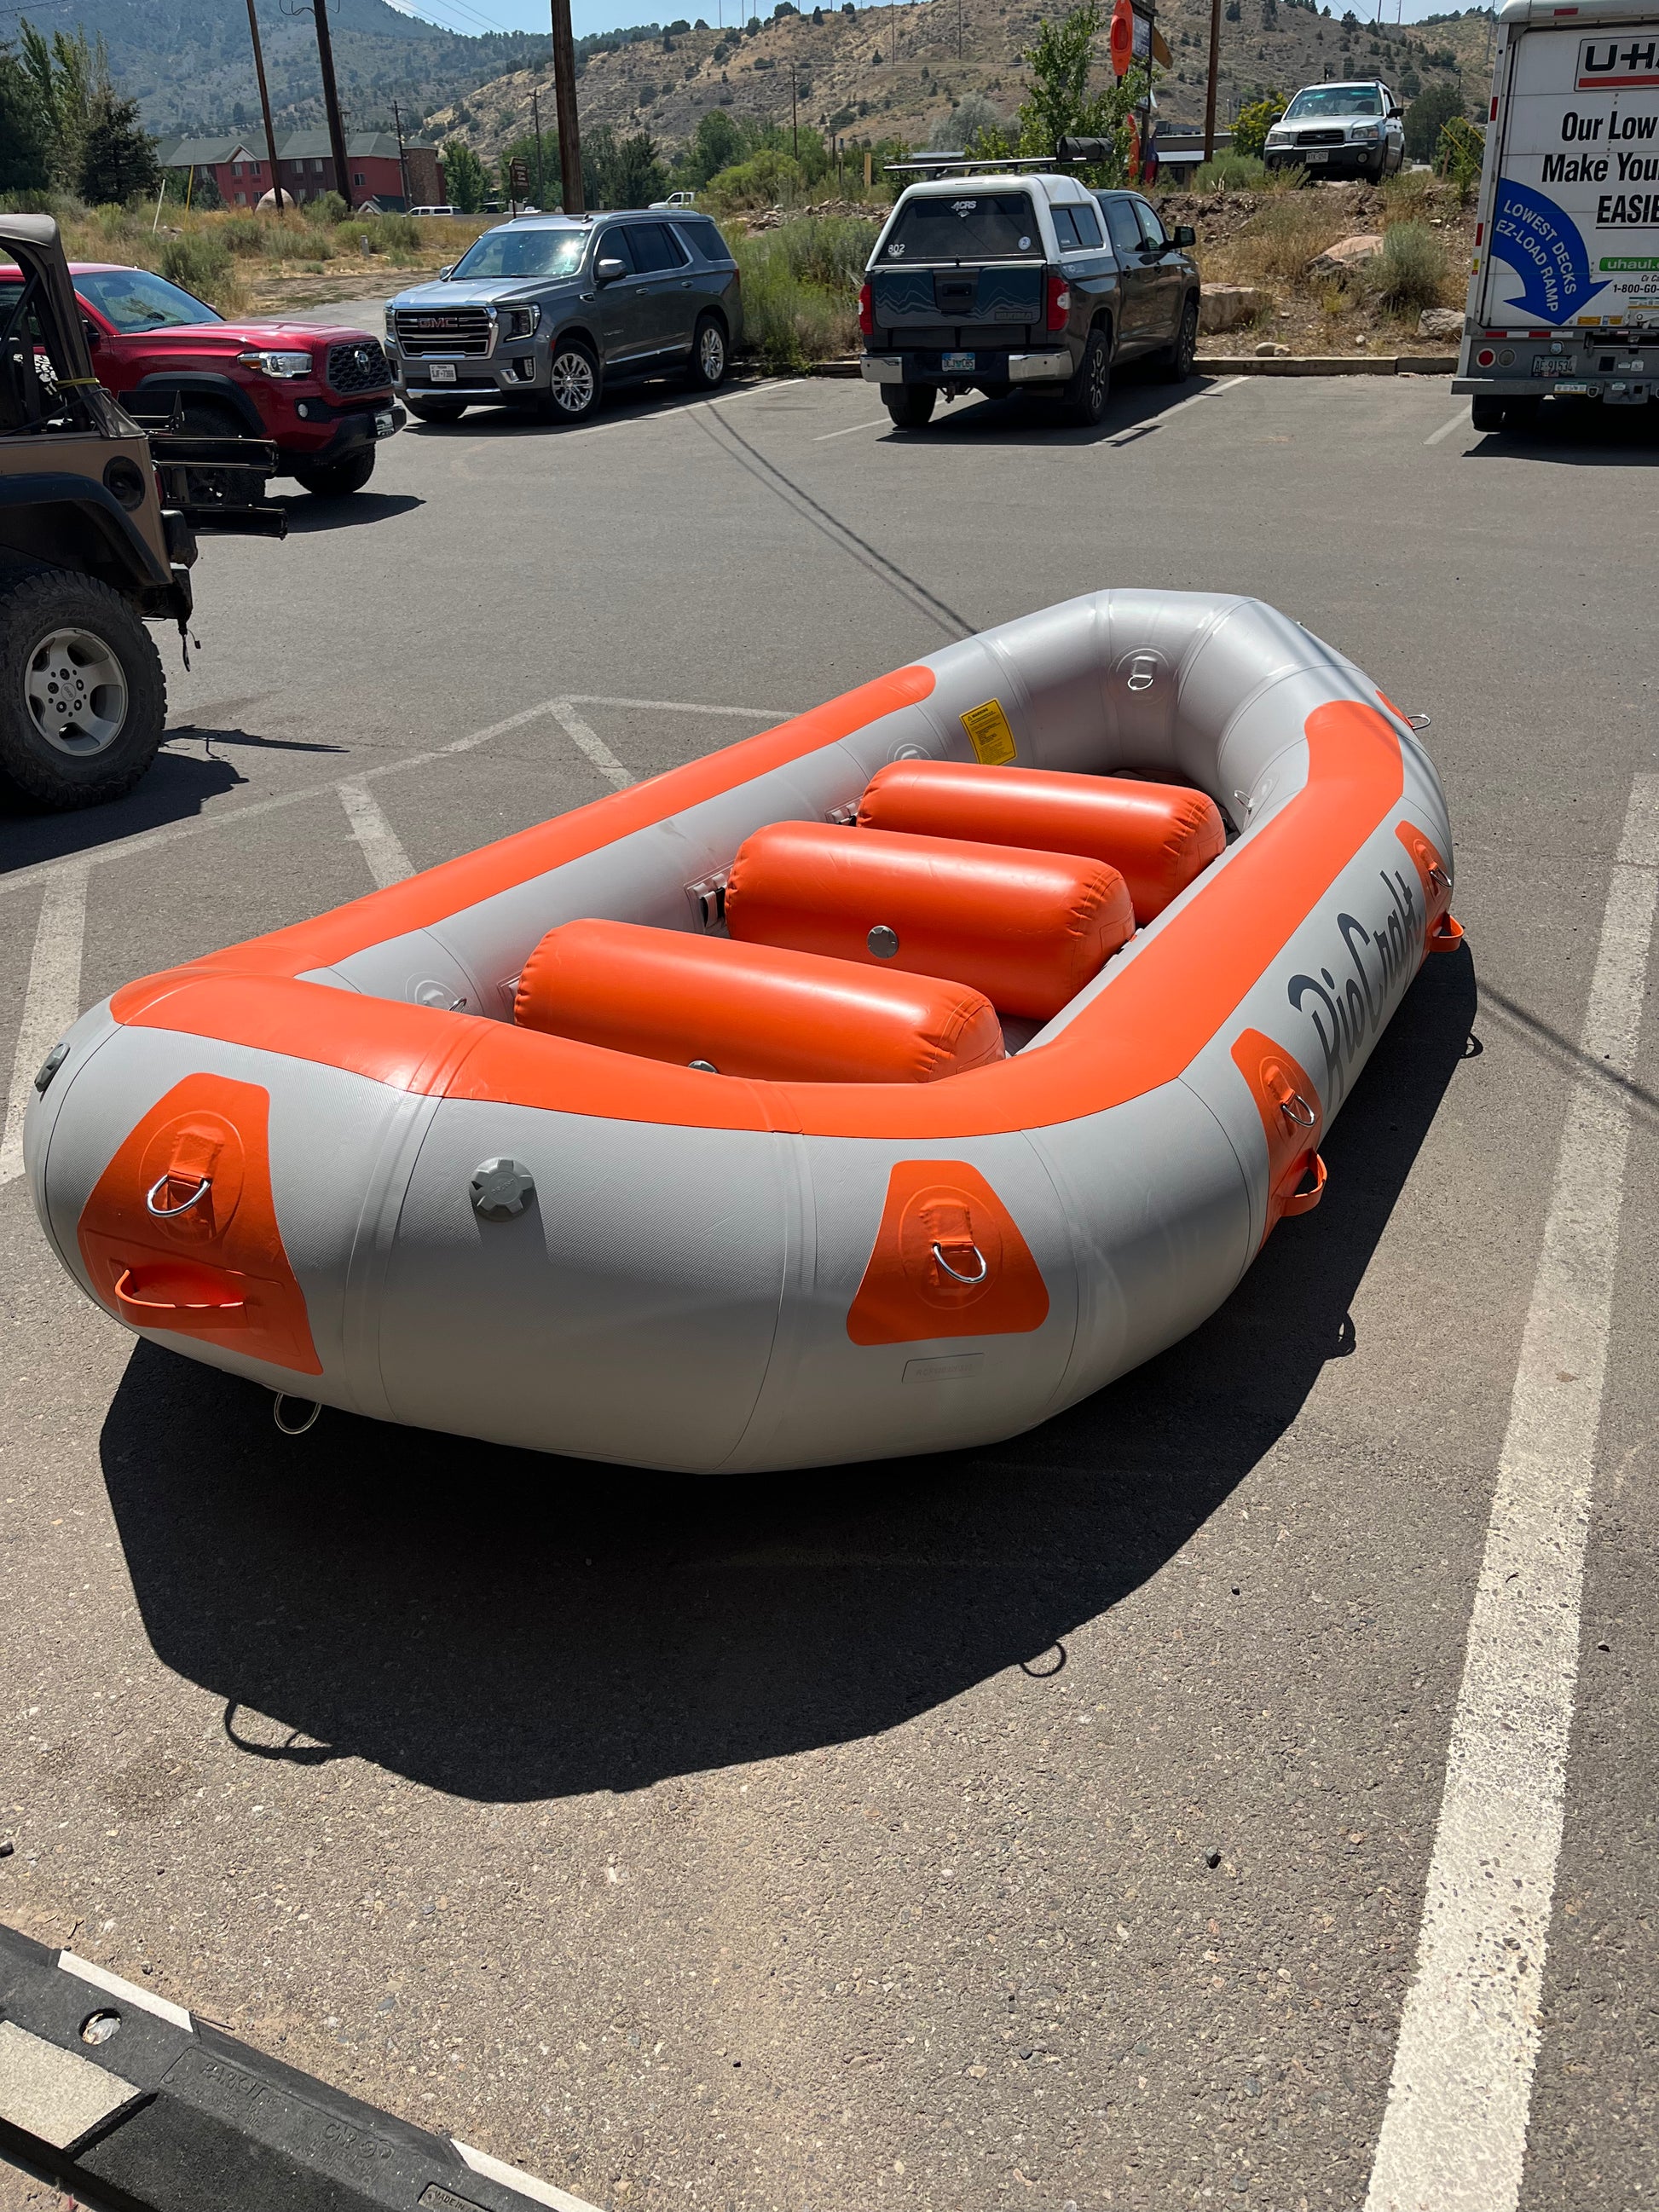 An Consignment 13' Colorado inflatable raft in a parking lot. (Brand Name: Rio Craft)